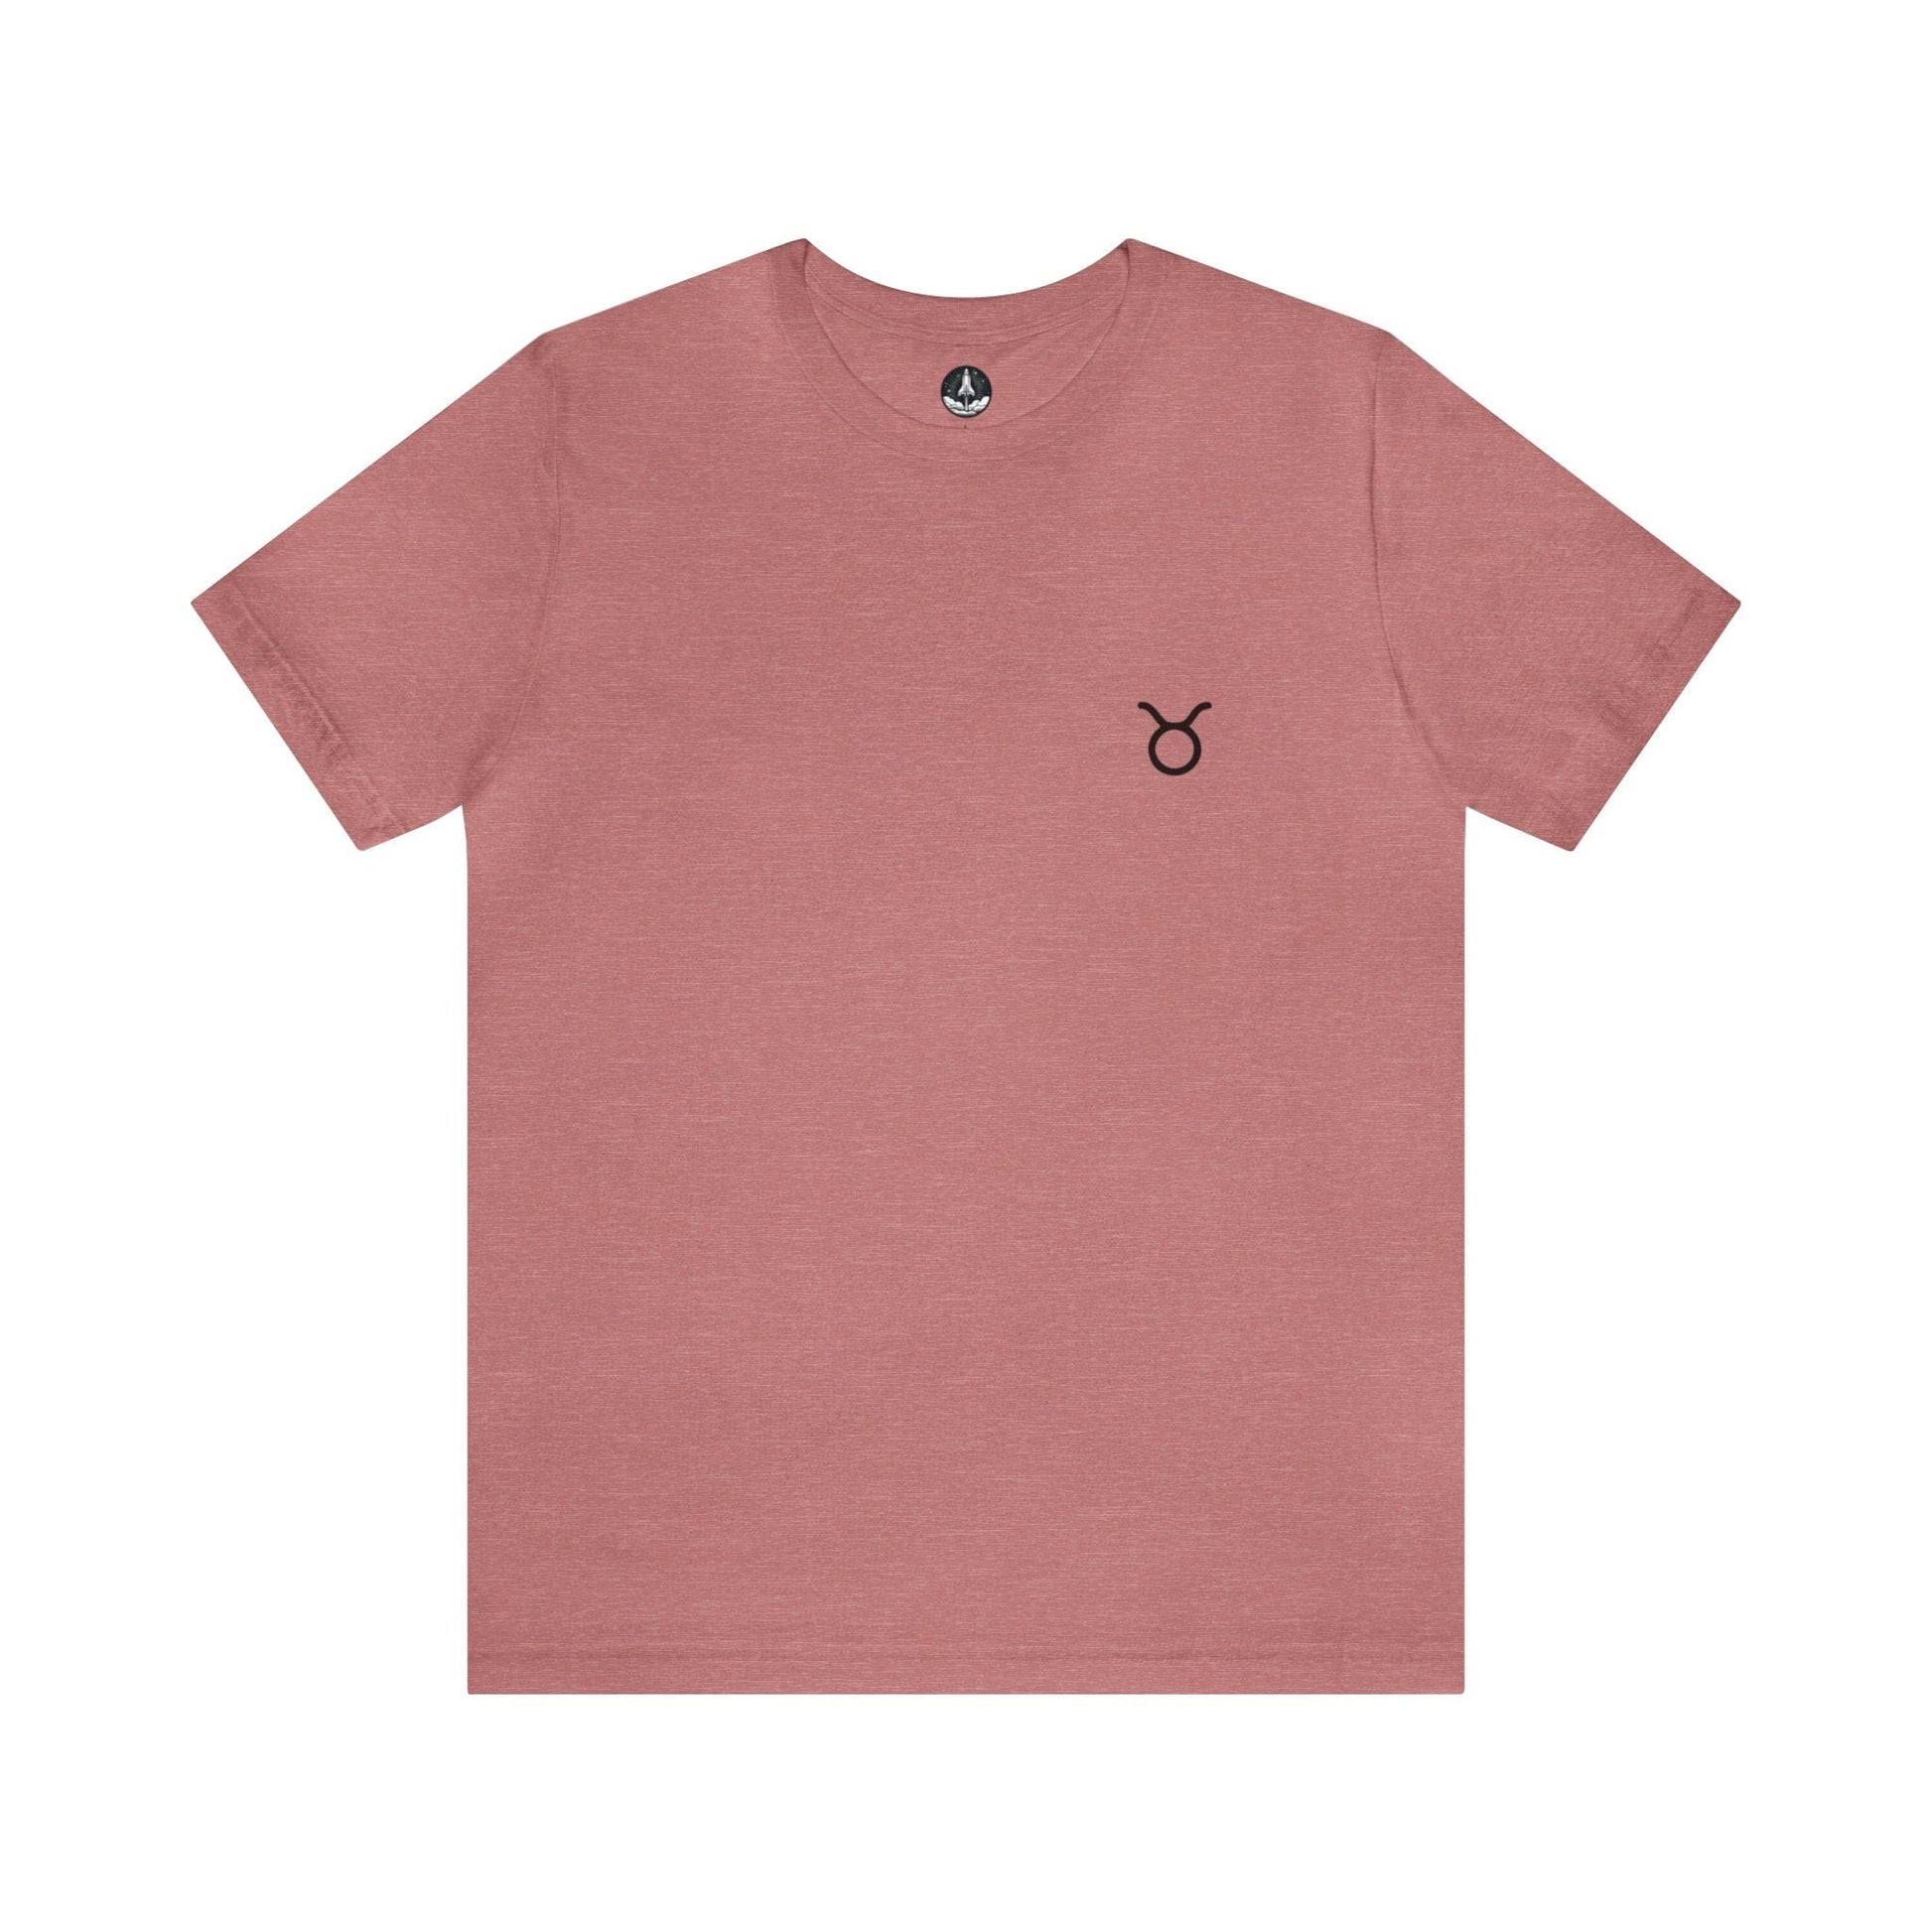 T-Shirt Heather Mauve / S Taurus Zodiac Essence T-Shirt: Sophistication Meets Comfort for the Grounded Soul